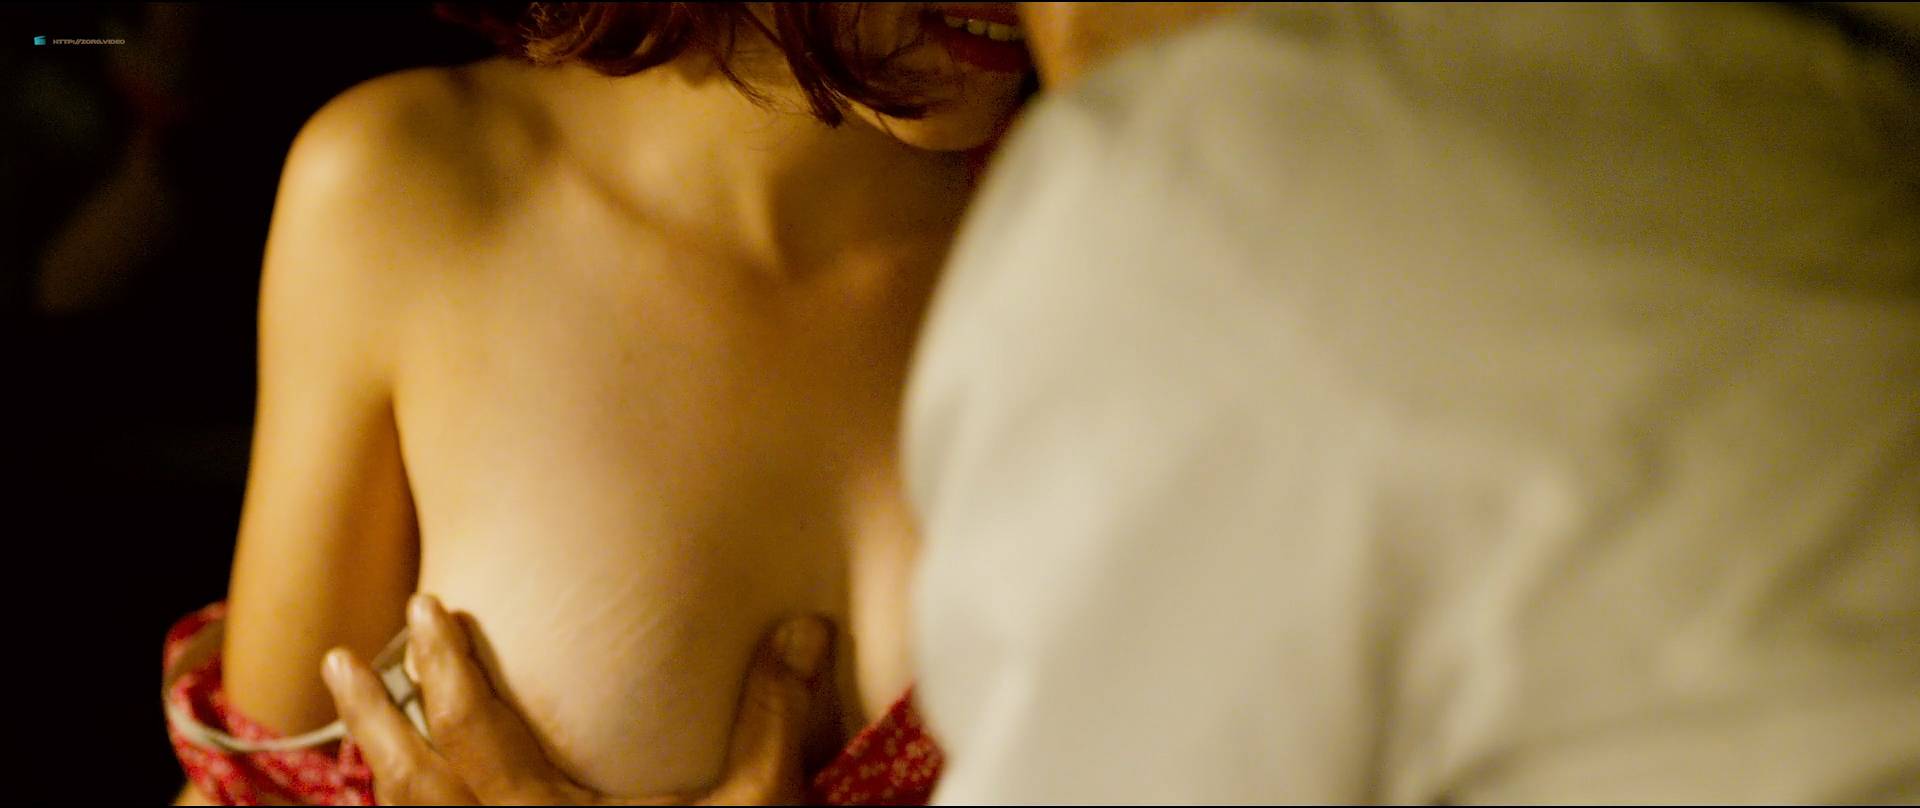 Adele-Exarchopoulos-nude-sex-Solene-Rigot-and-Adele-Haenel-nude-sex-too-Orp...